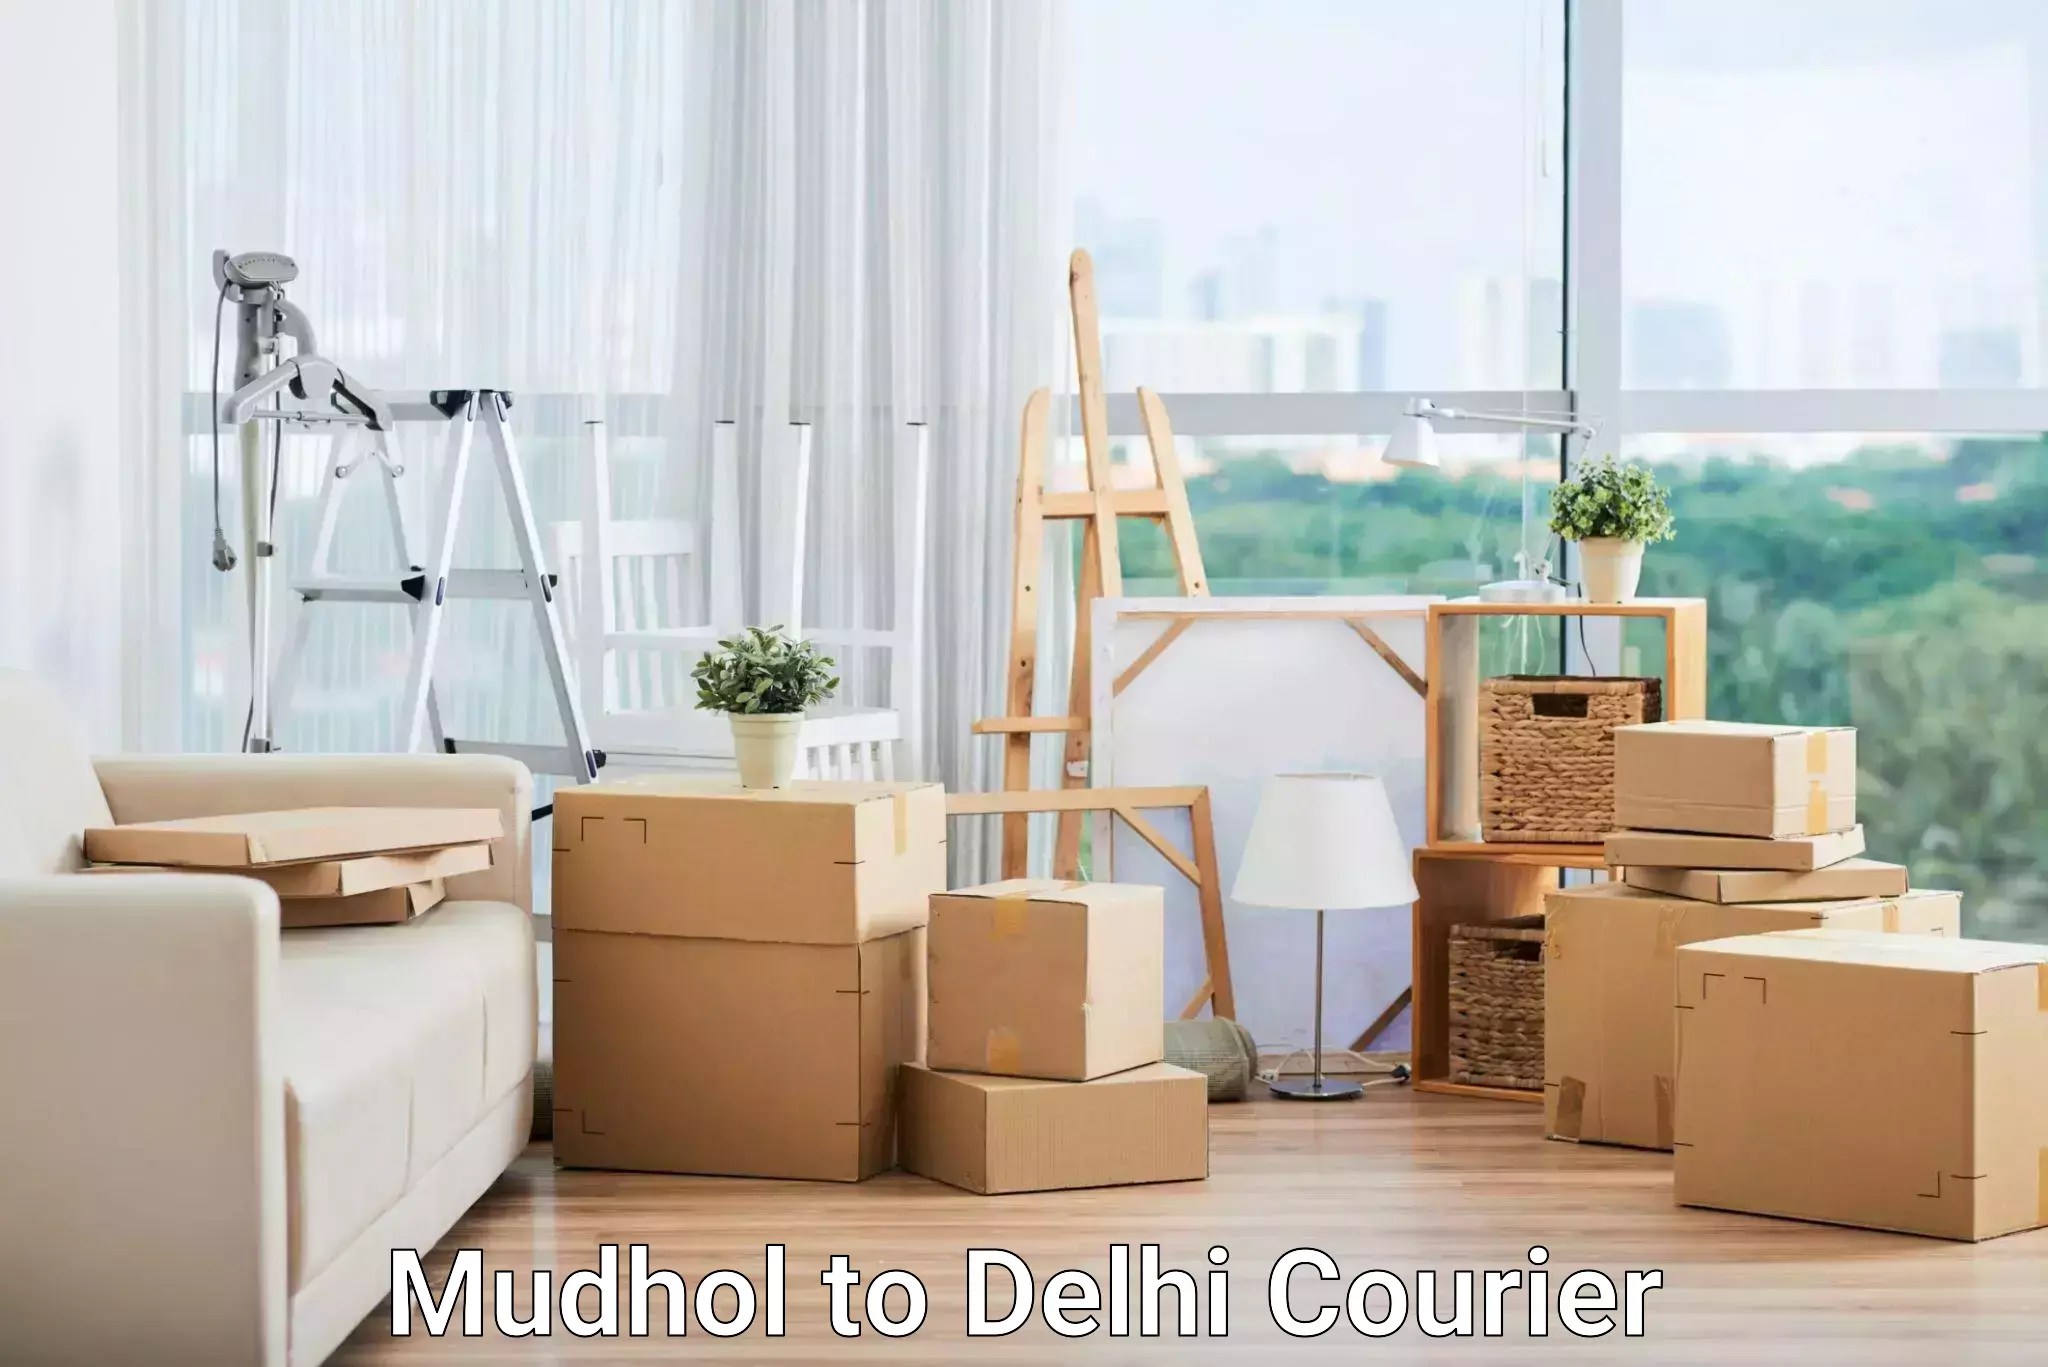 Express package delivery Mudhol to NCR